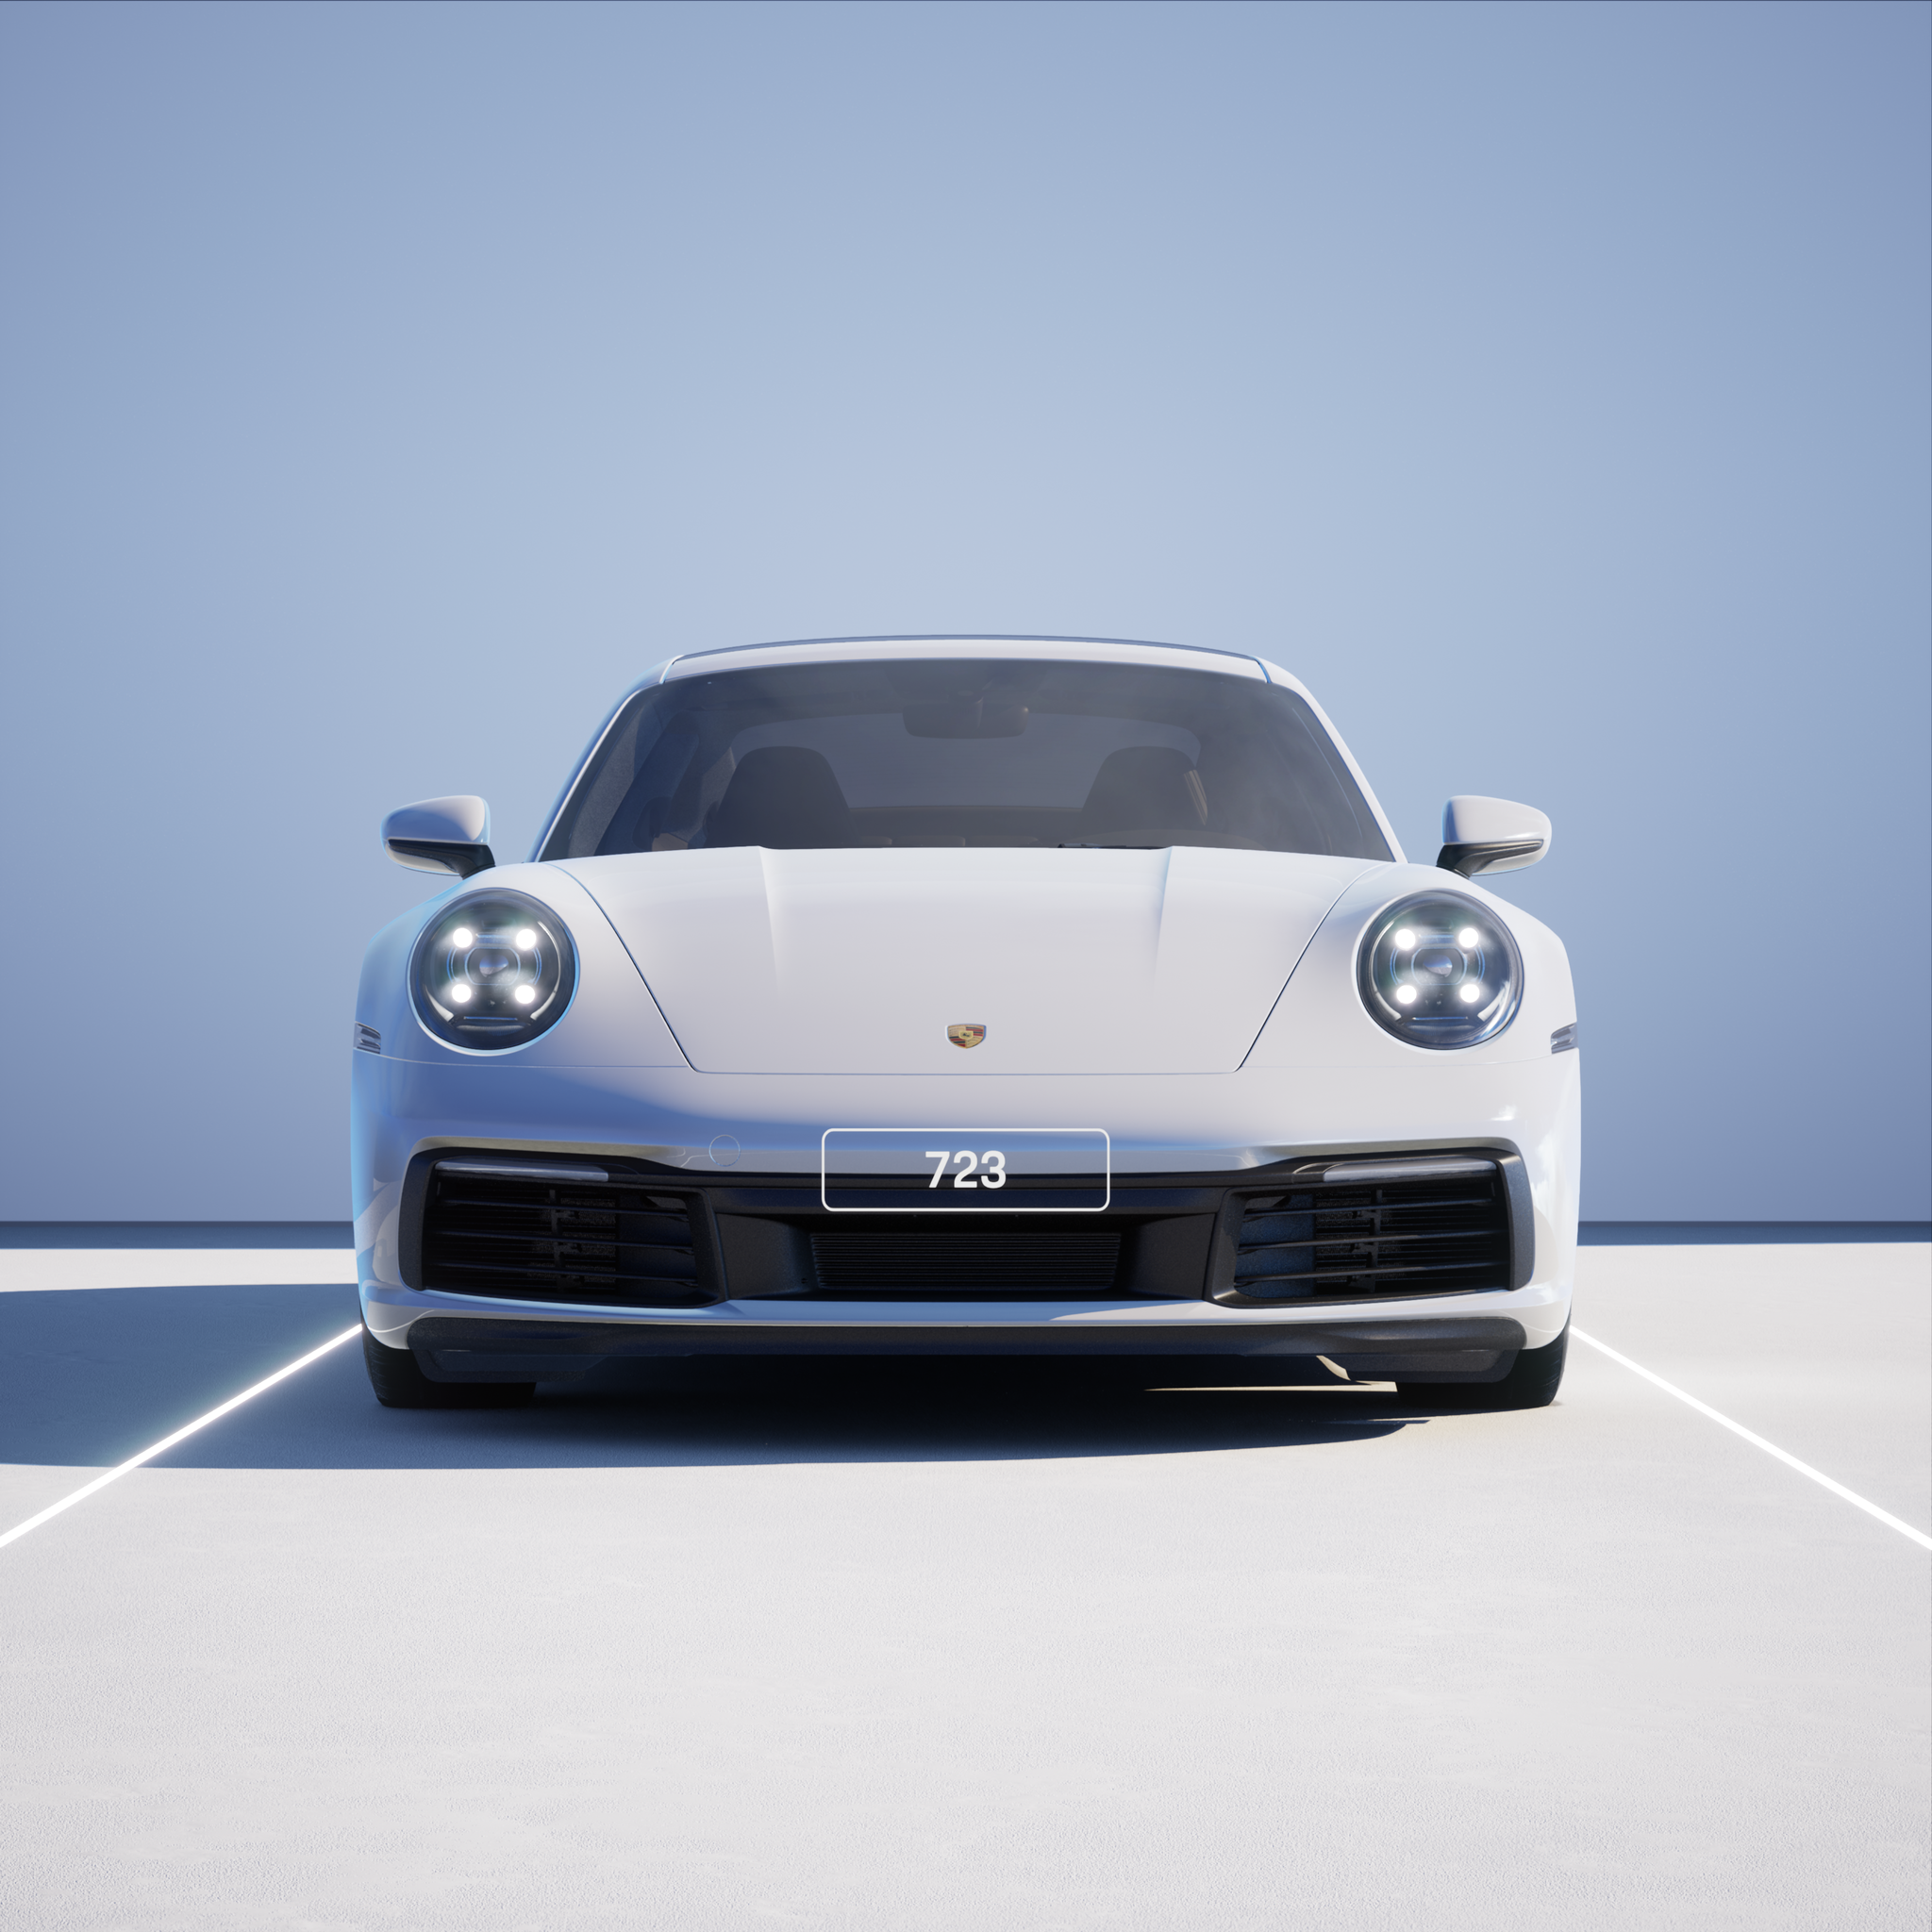 The PORSCHΞ 911 723 image in phase